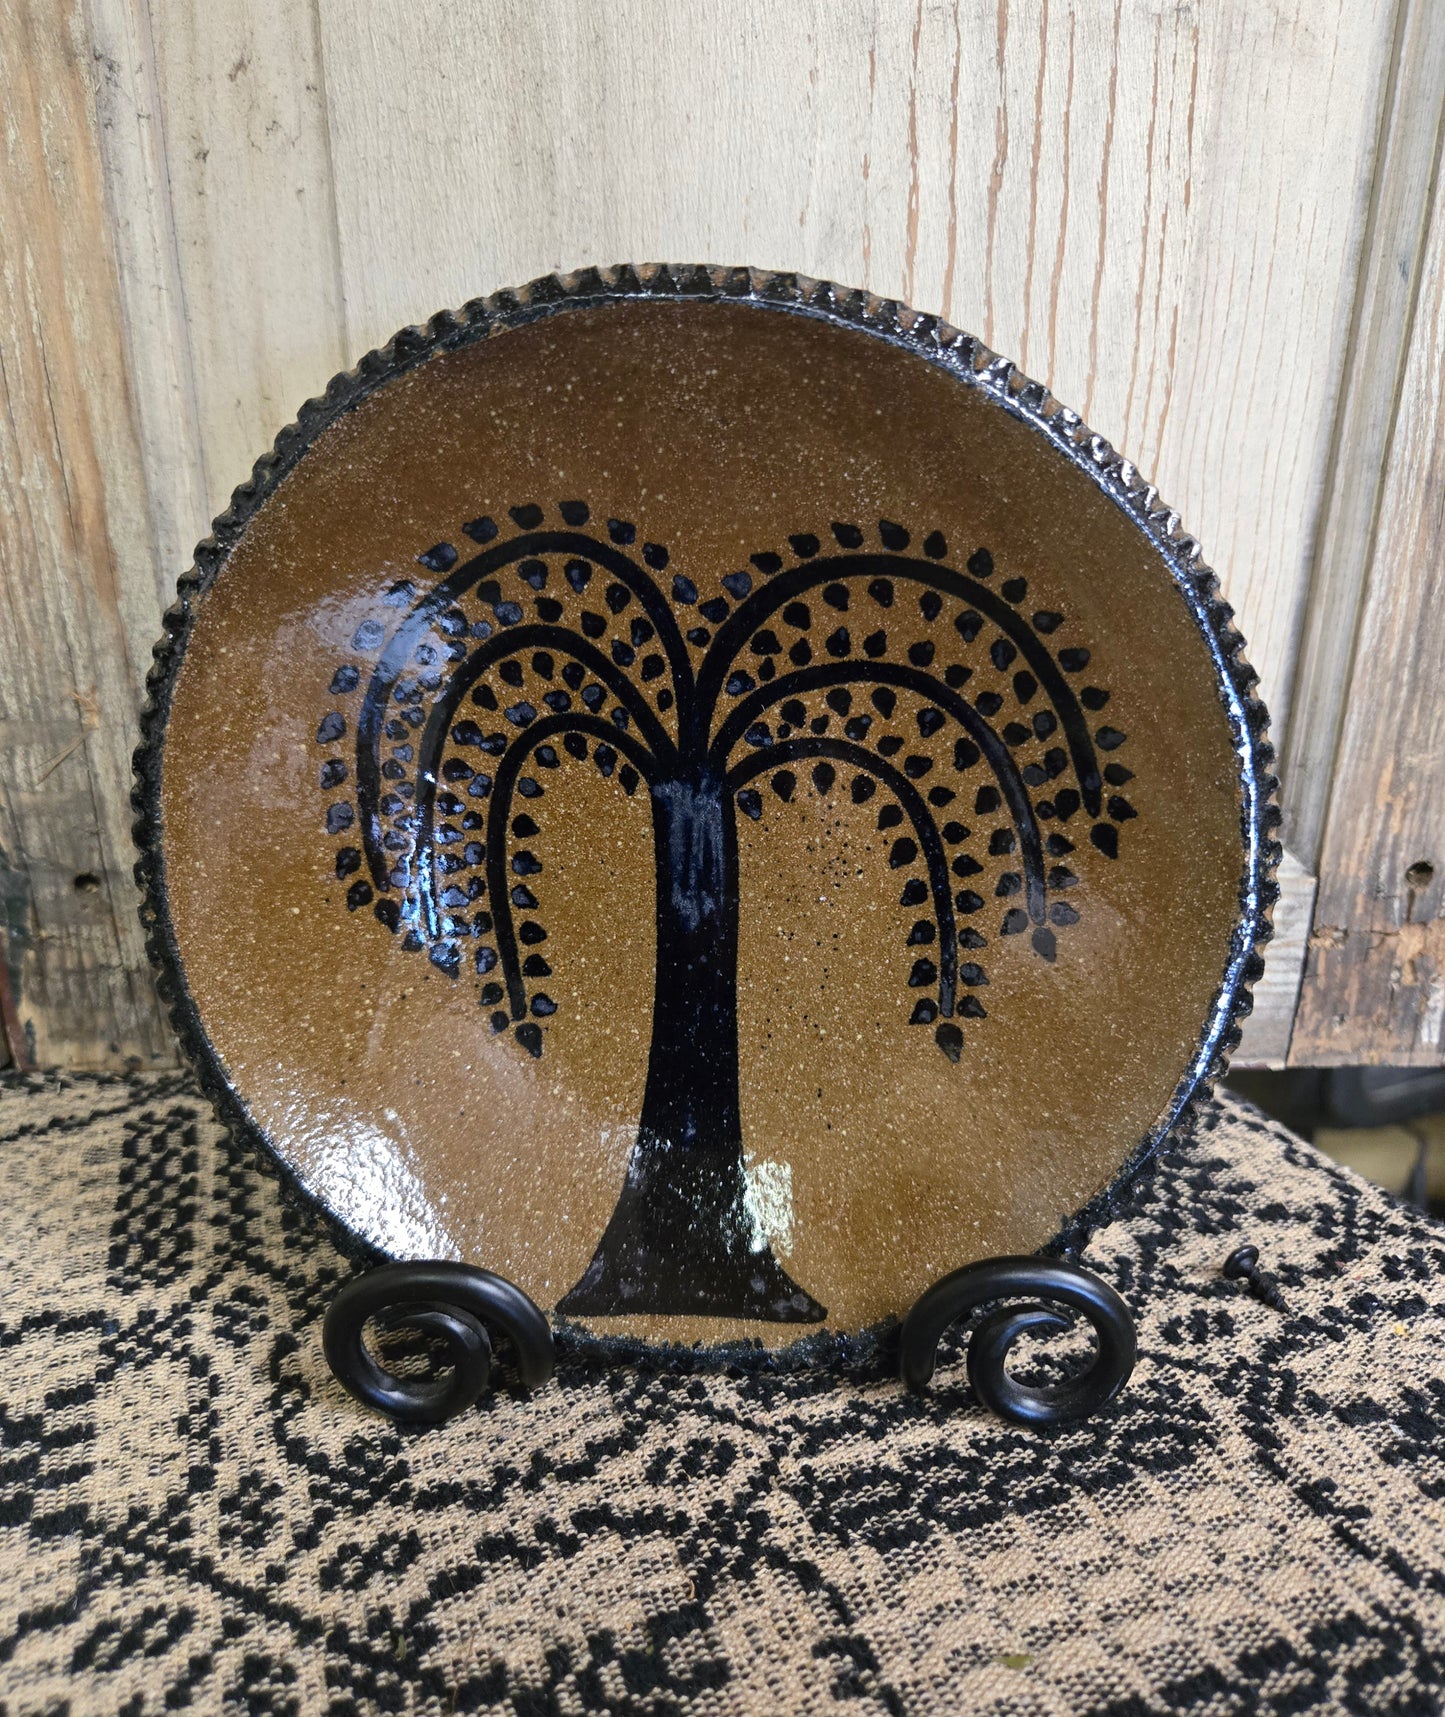 Collection of Round Stoneware Plates - 7"